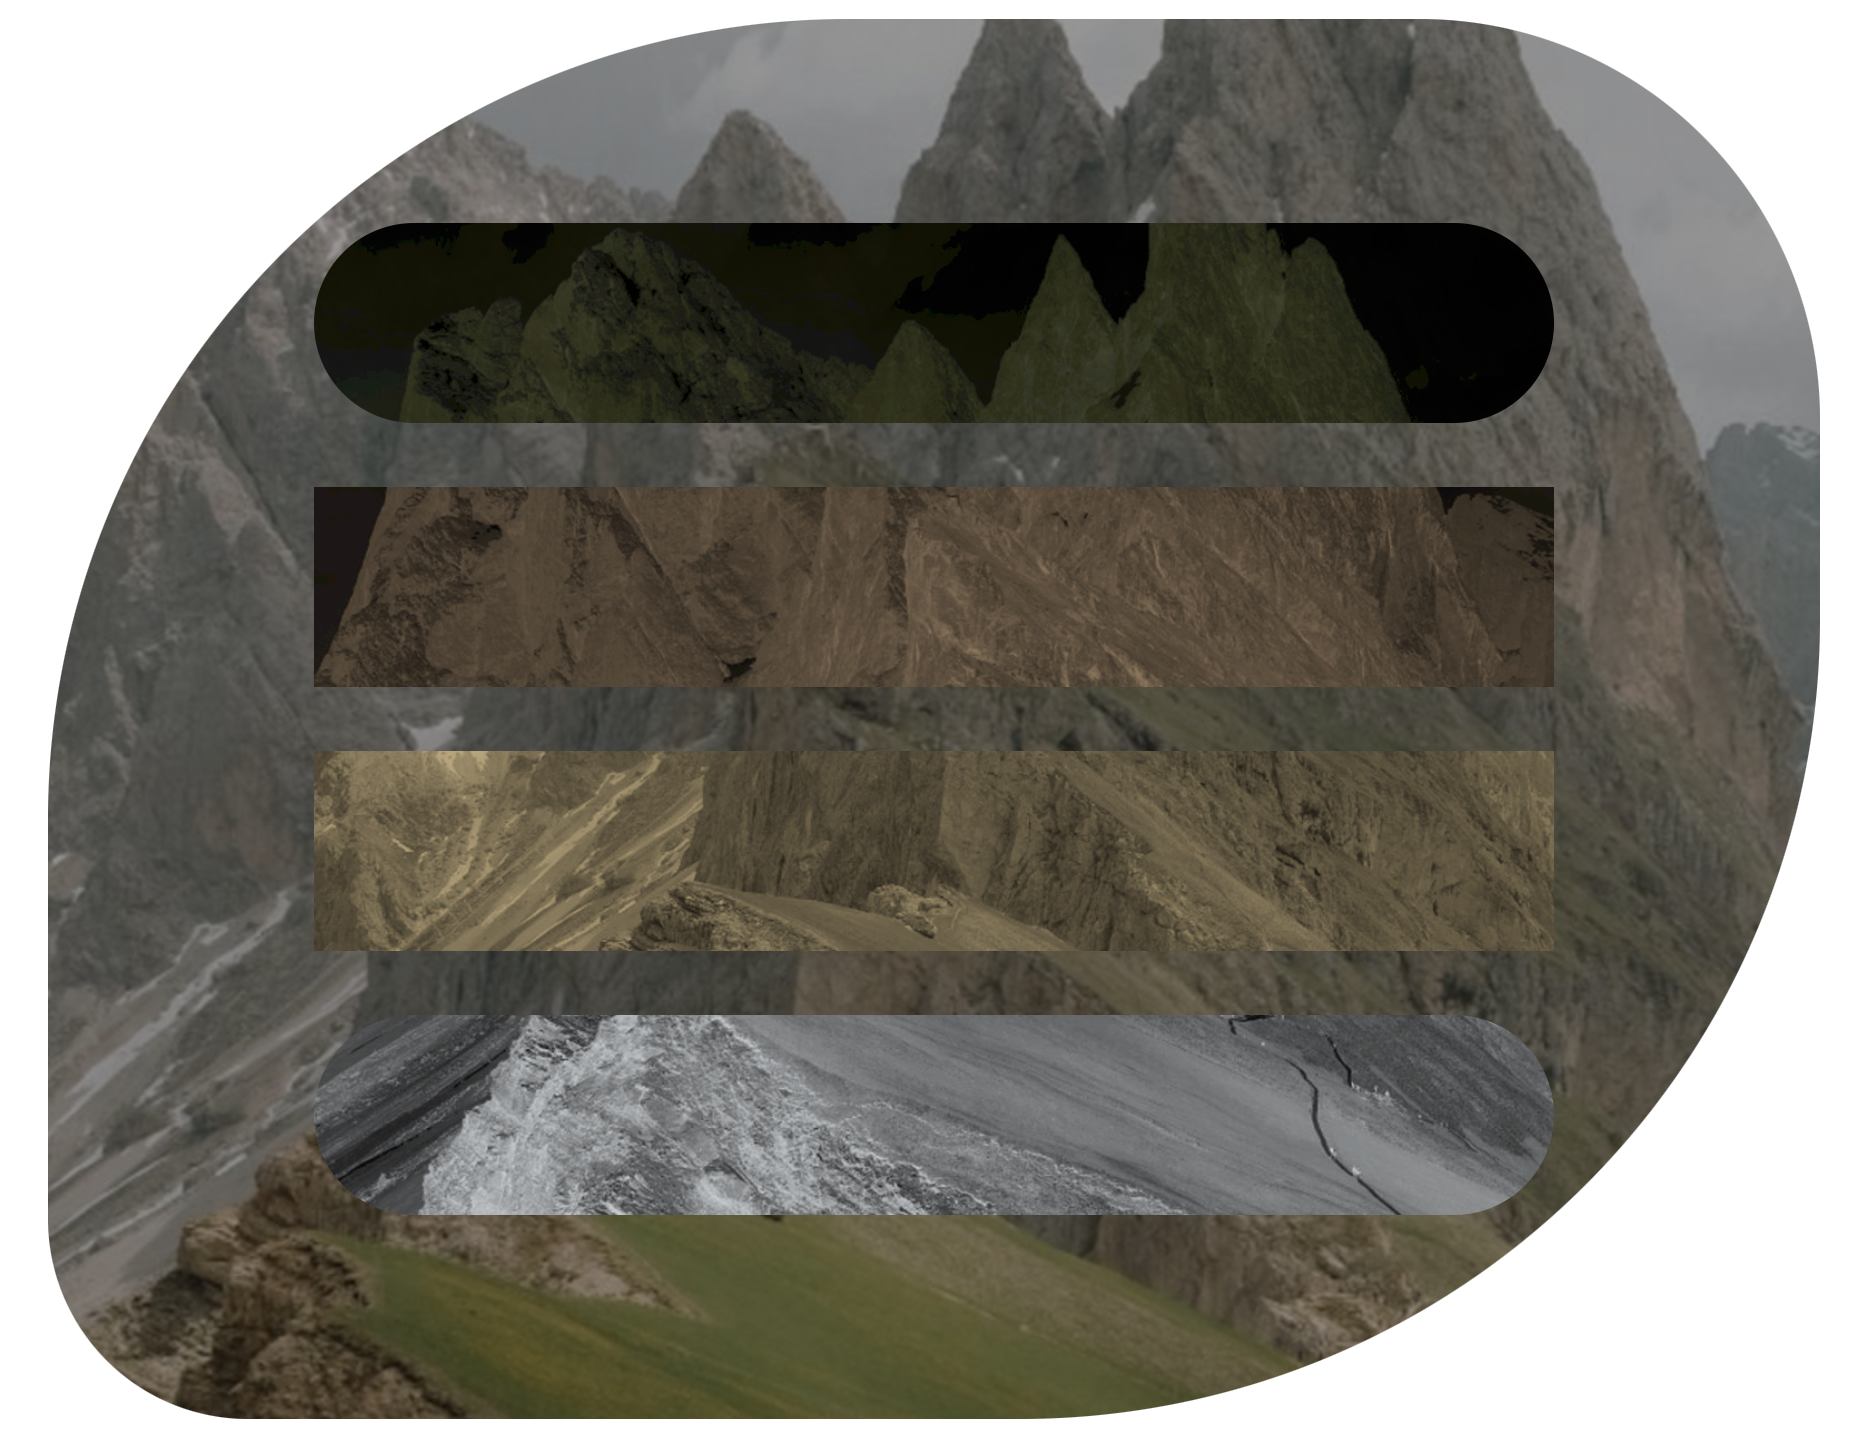 Mountain range with four different views showcasing different colors built within the image.